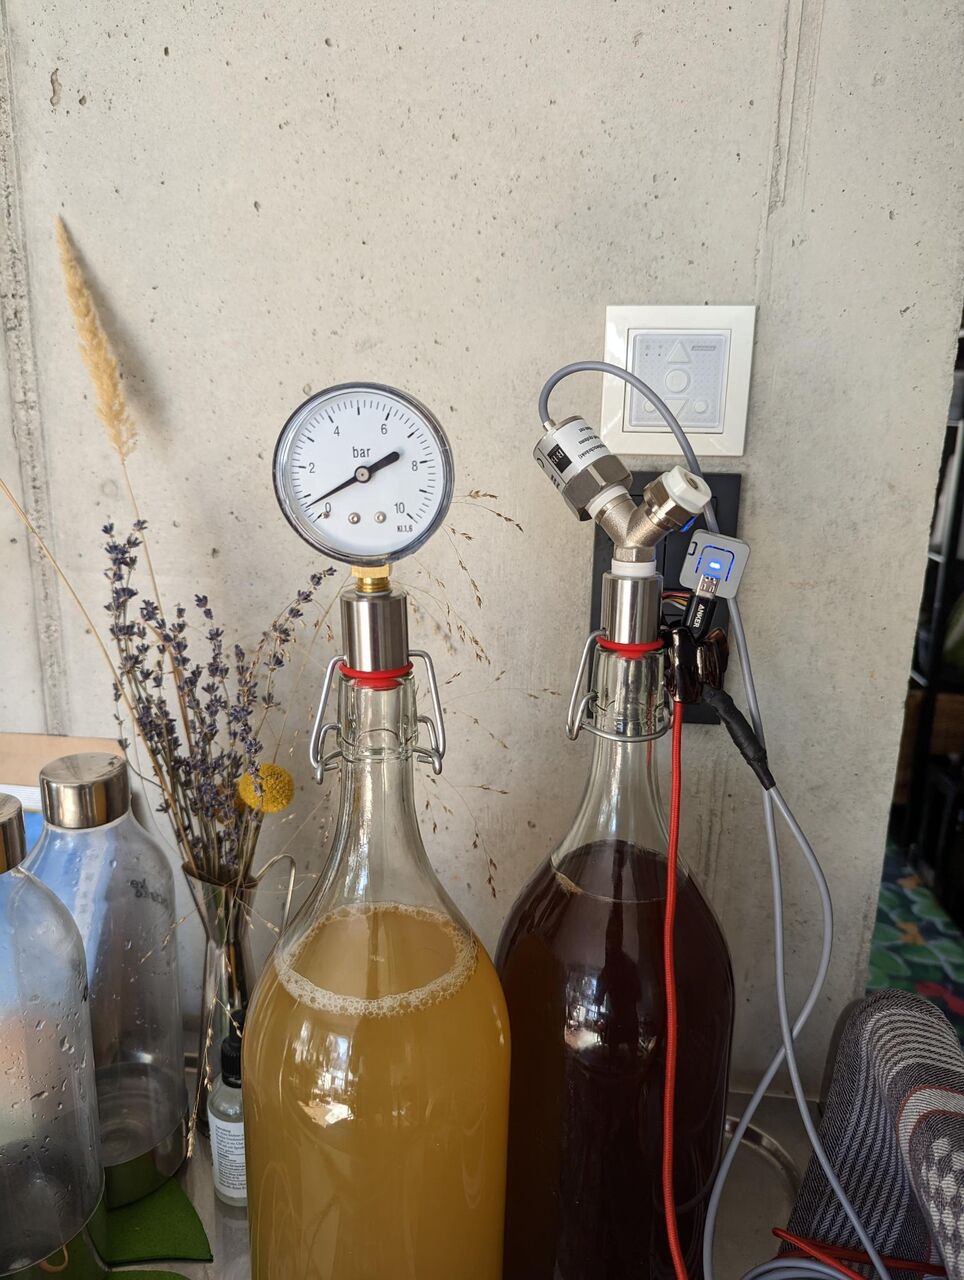 Kombucha bottles with analogue gauge (left) and digital sensor device by Defsystem (right), picture by Labra.studio